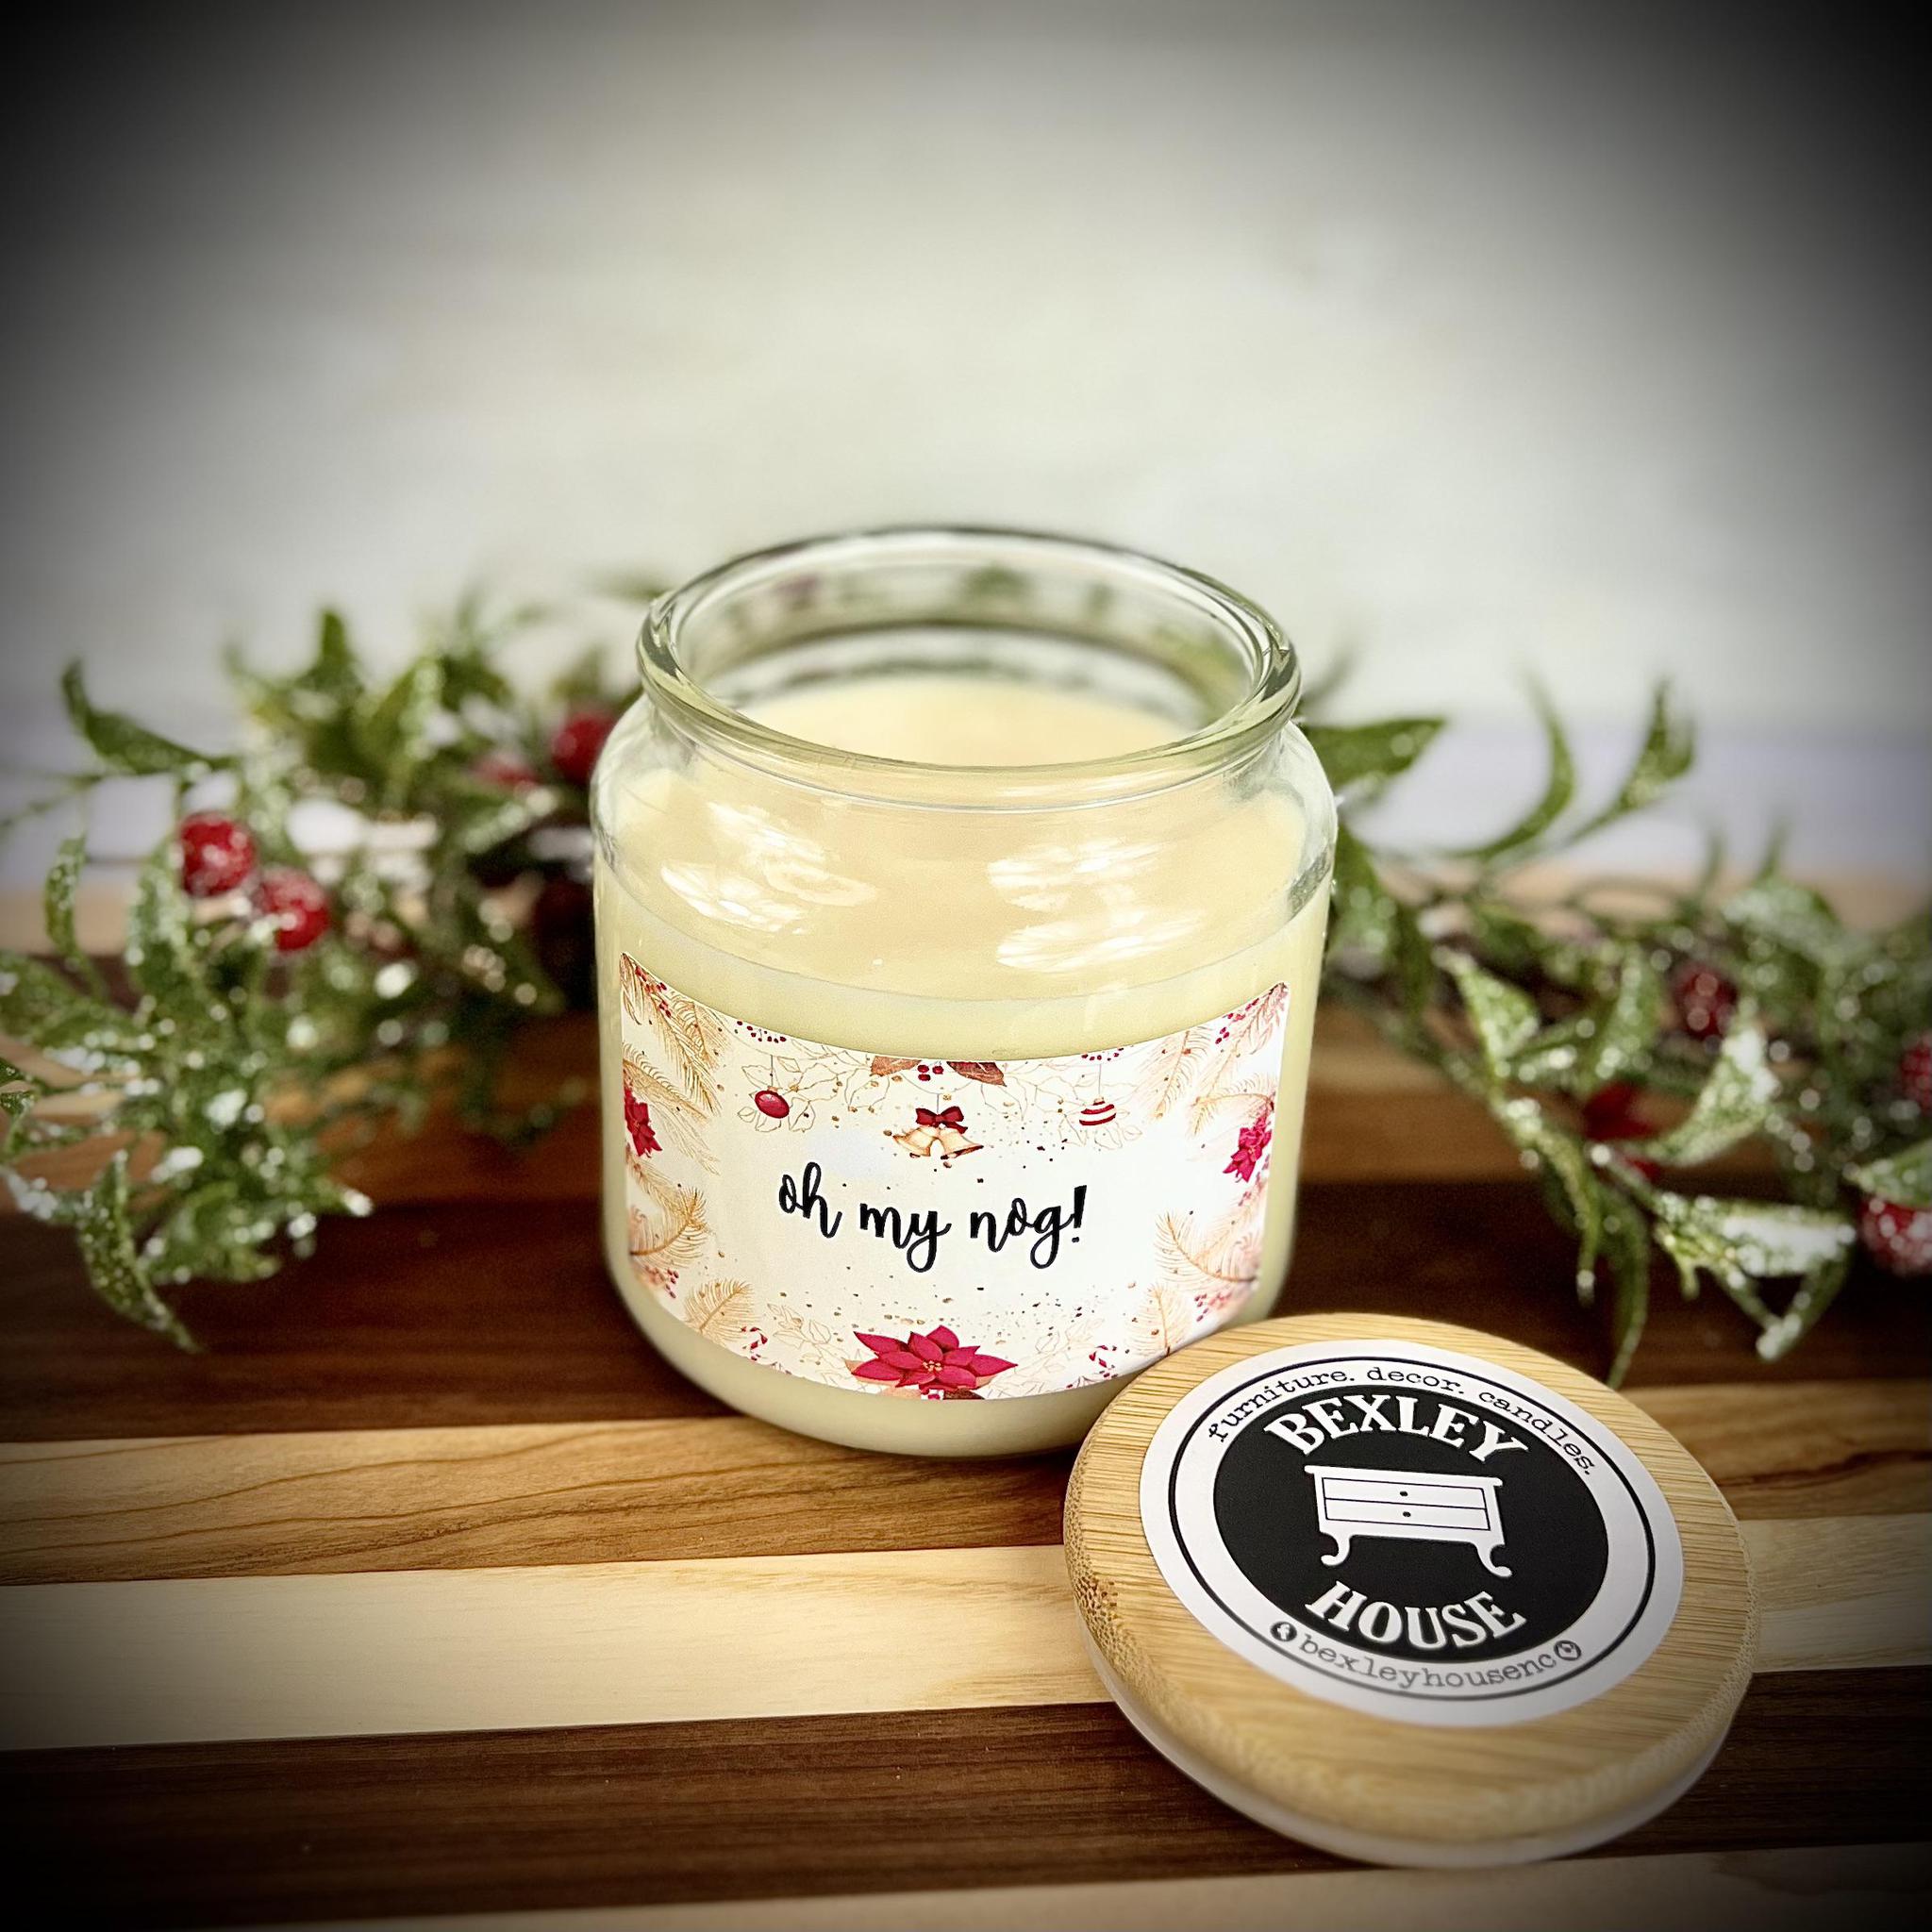 Bexley House 16oz Apothecary Candle - Oh My Nog